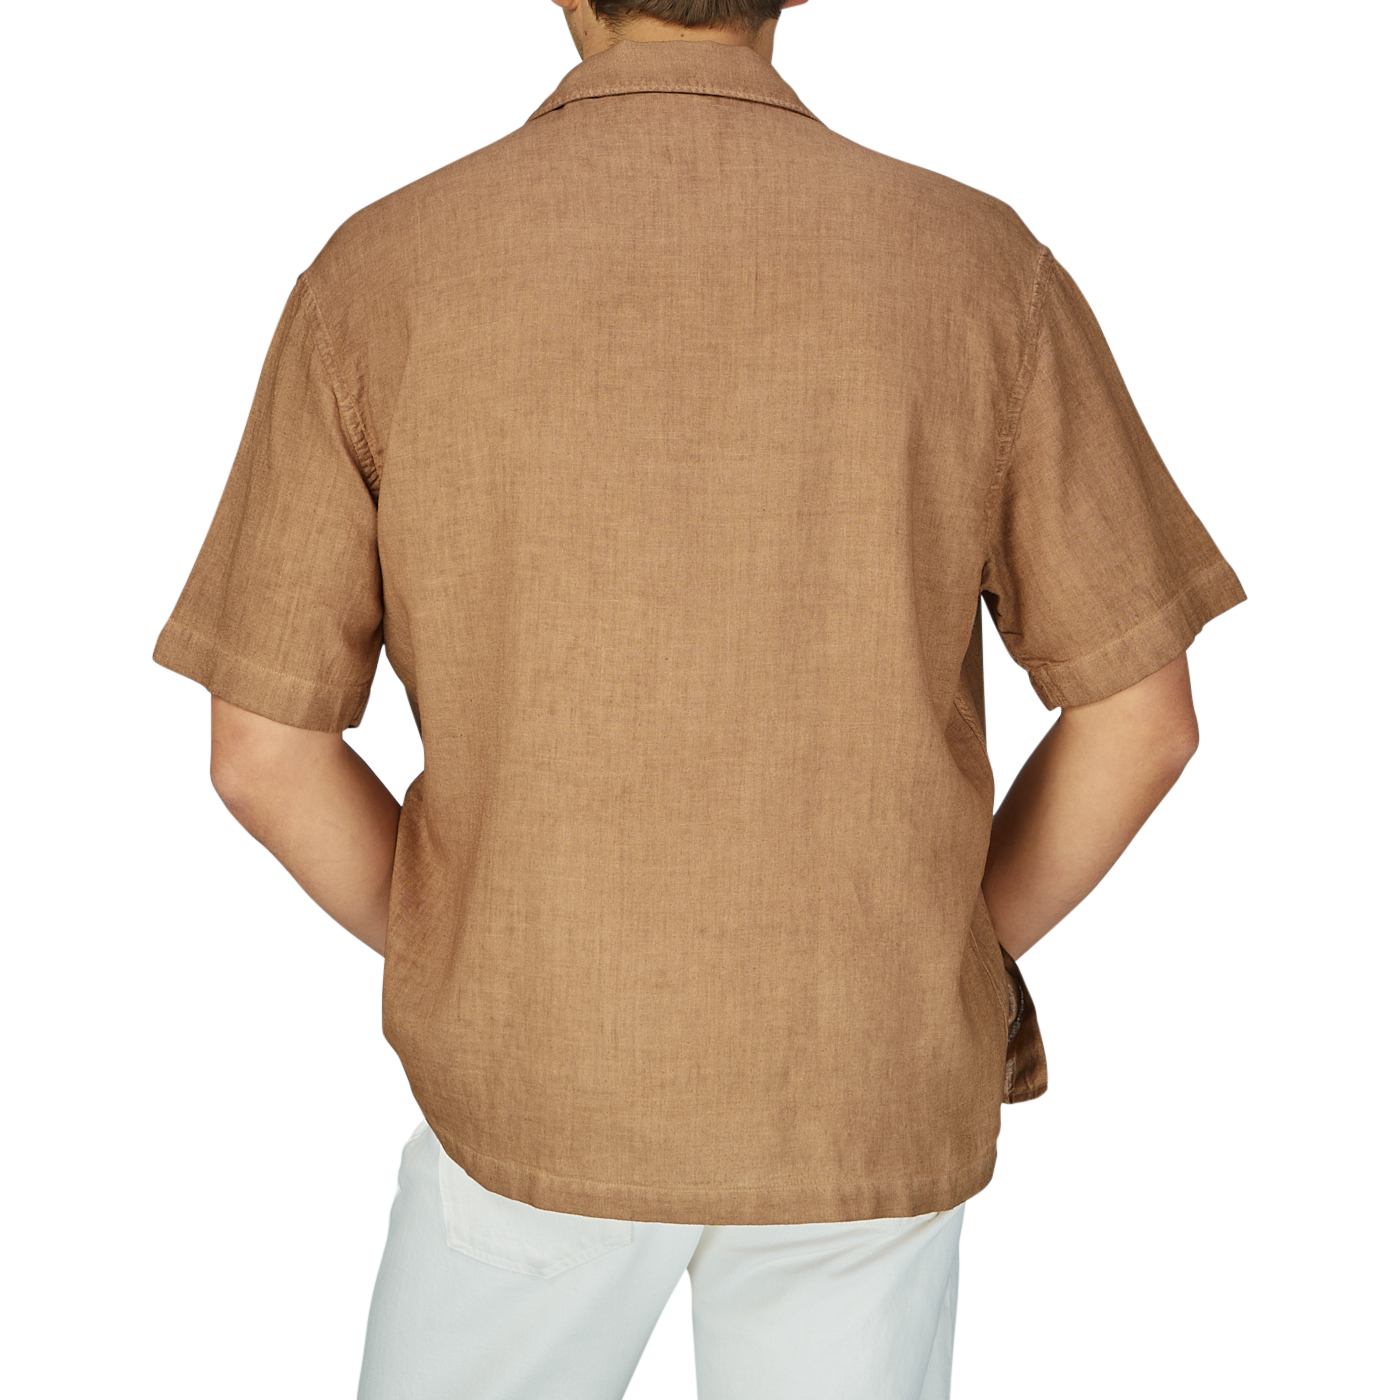 Man wearing an Altea Tobacco Brown Linen Blend Camp Collar Shirt with mother-of-pearl buttons and white pants, viewed from the back.